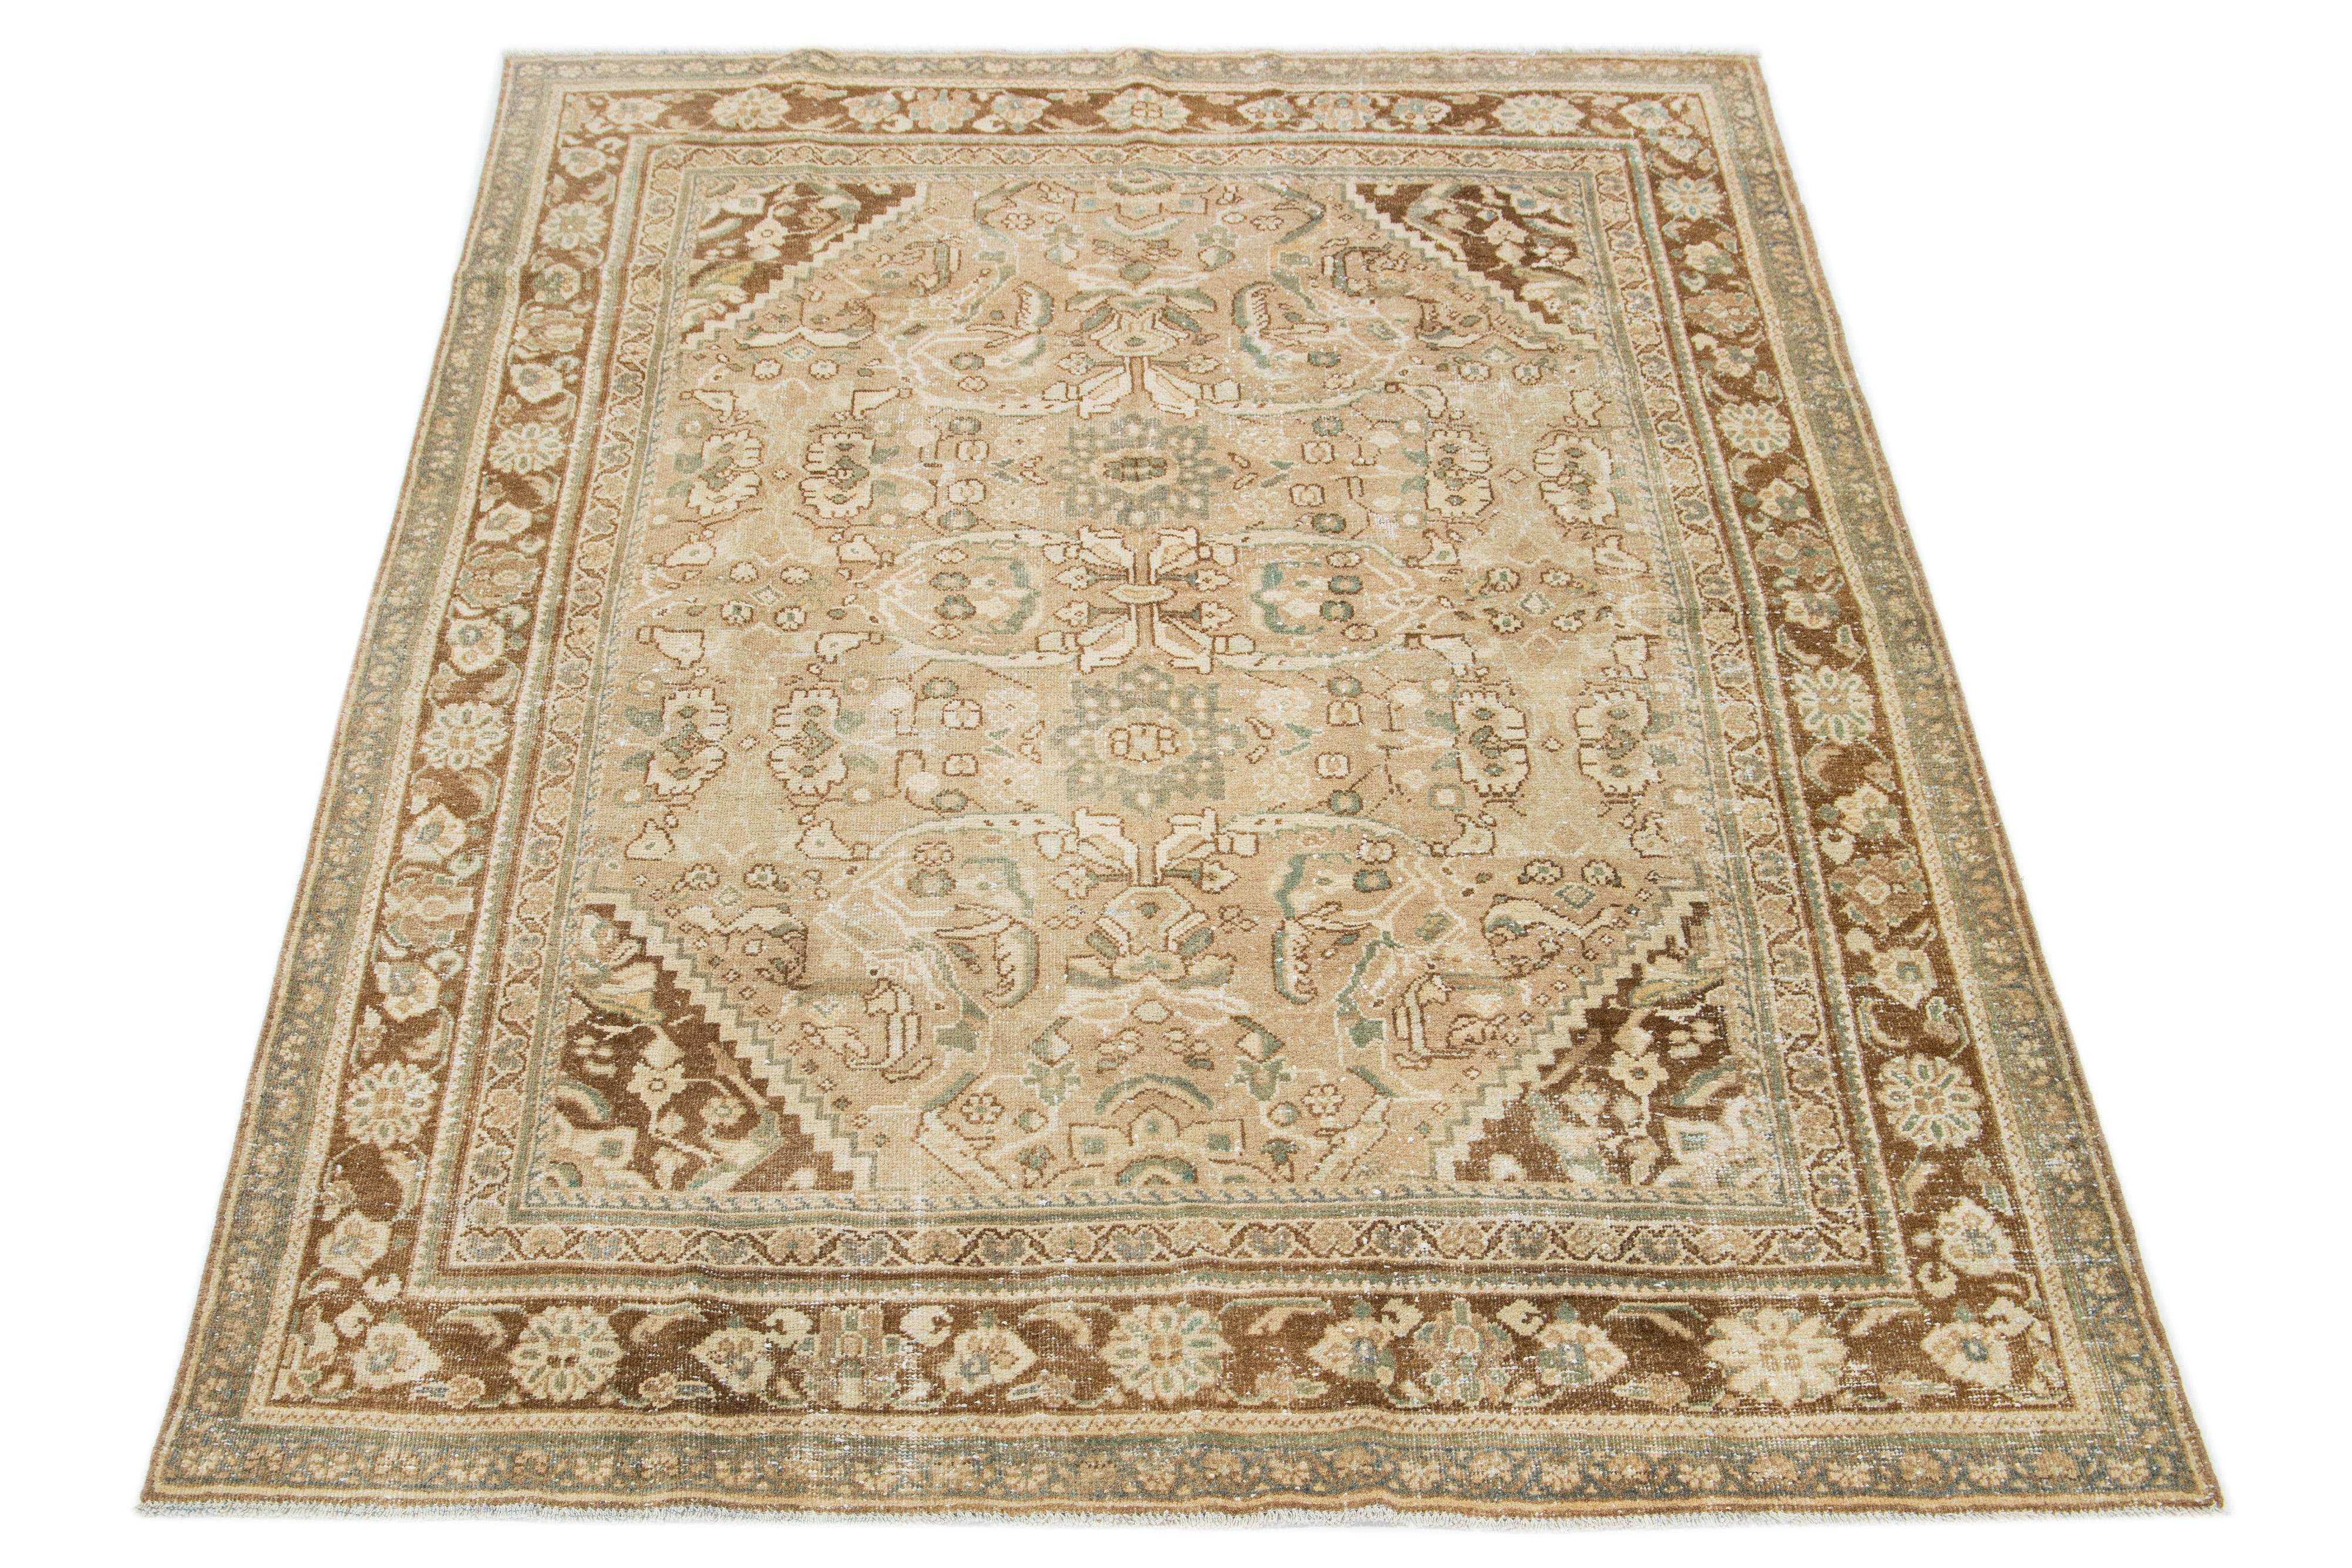 Beautiful Vintage Mahal hand-knotted wool rug with a beige color field. This Persian rug has classic green and brown hues throughout the floral design.

This rug measures 7'2